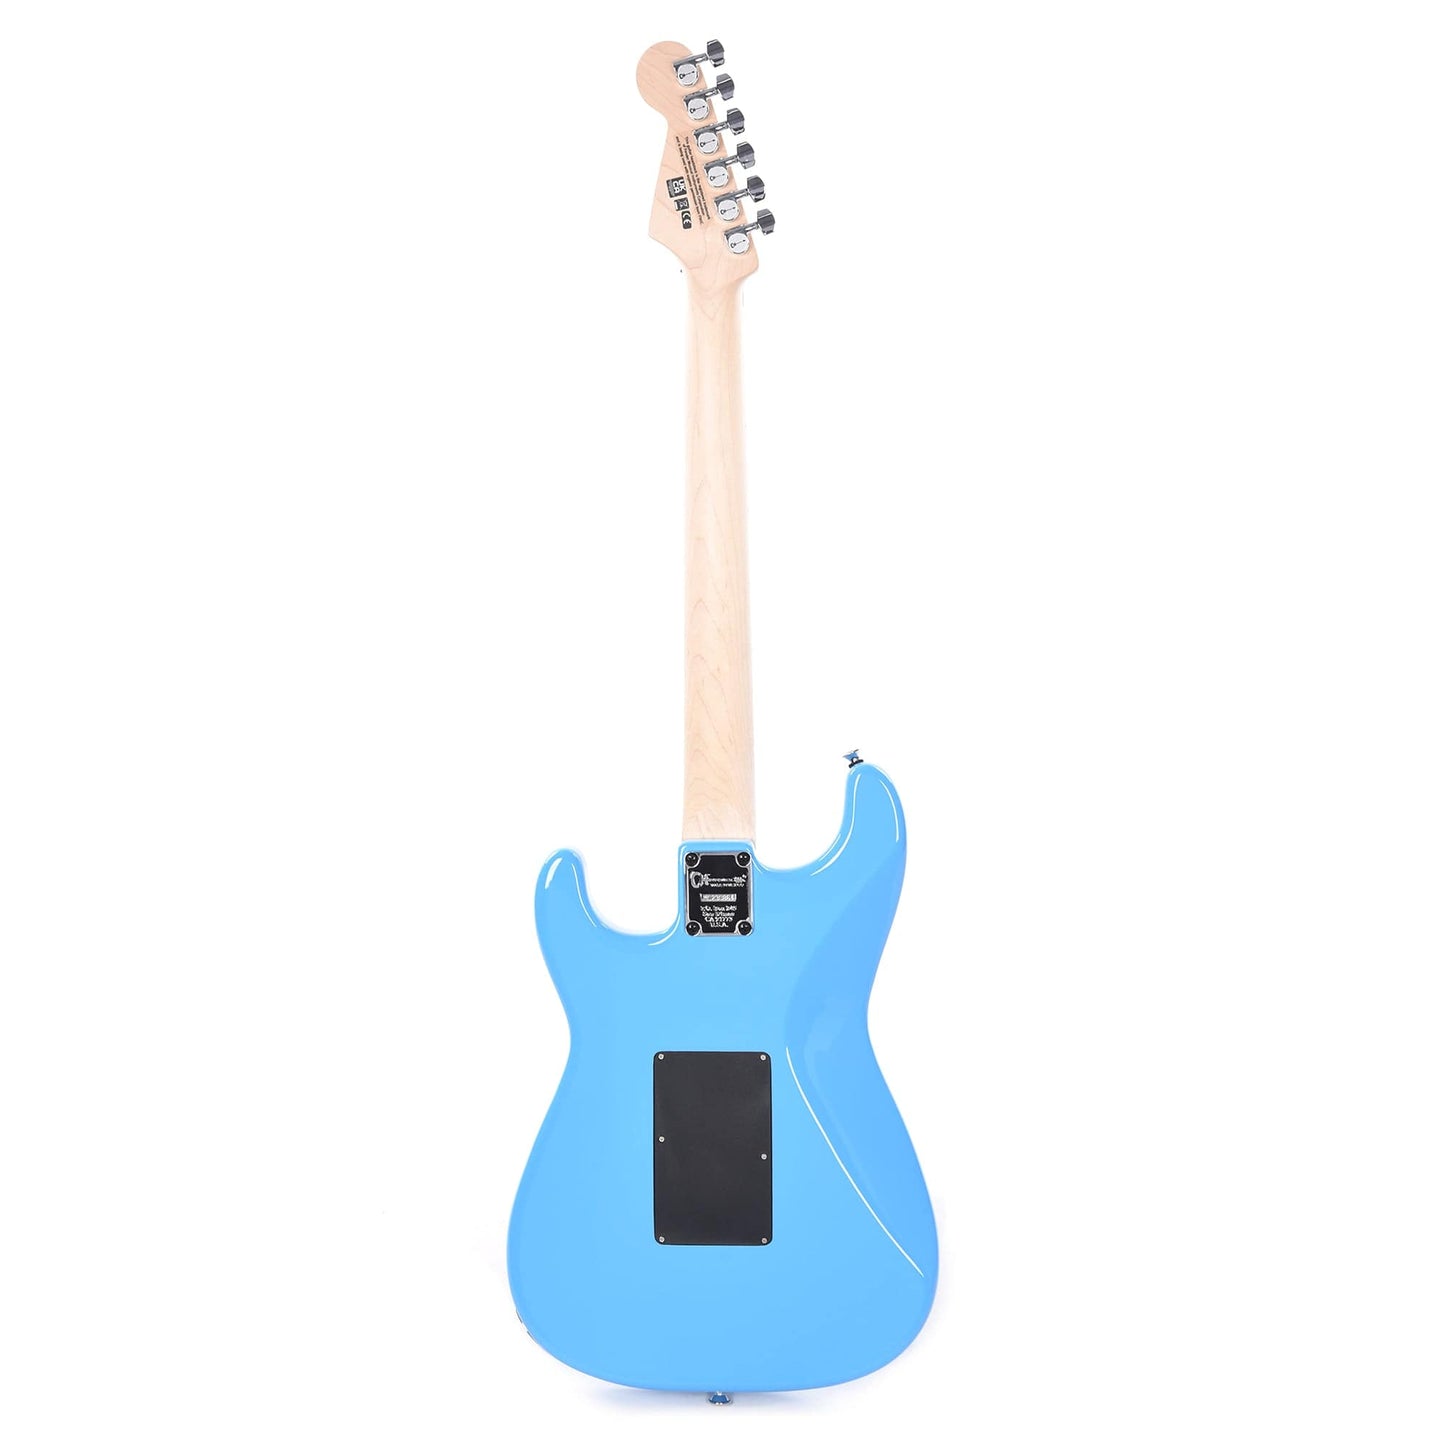 Charvel Pro-Mod So-Cal Style 1 HH FR M Infinity Blue Electric Guitars / Solid Body